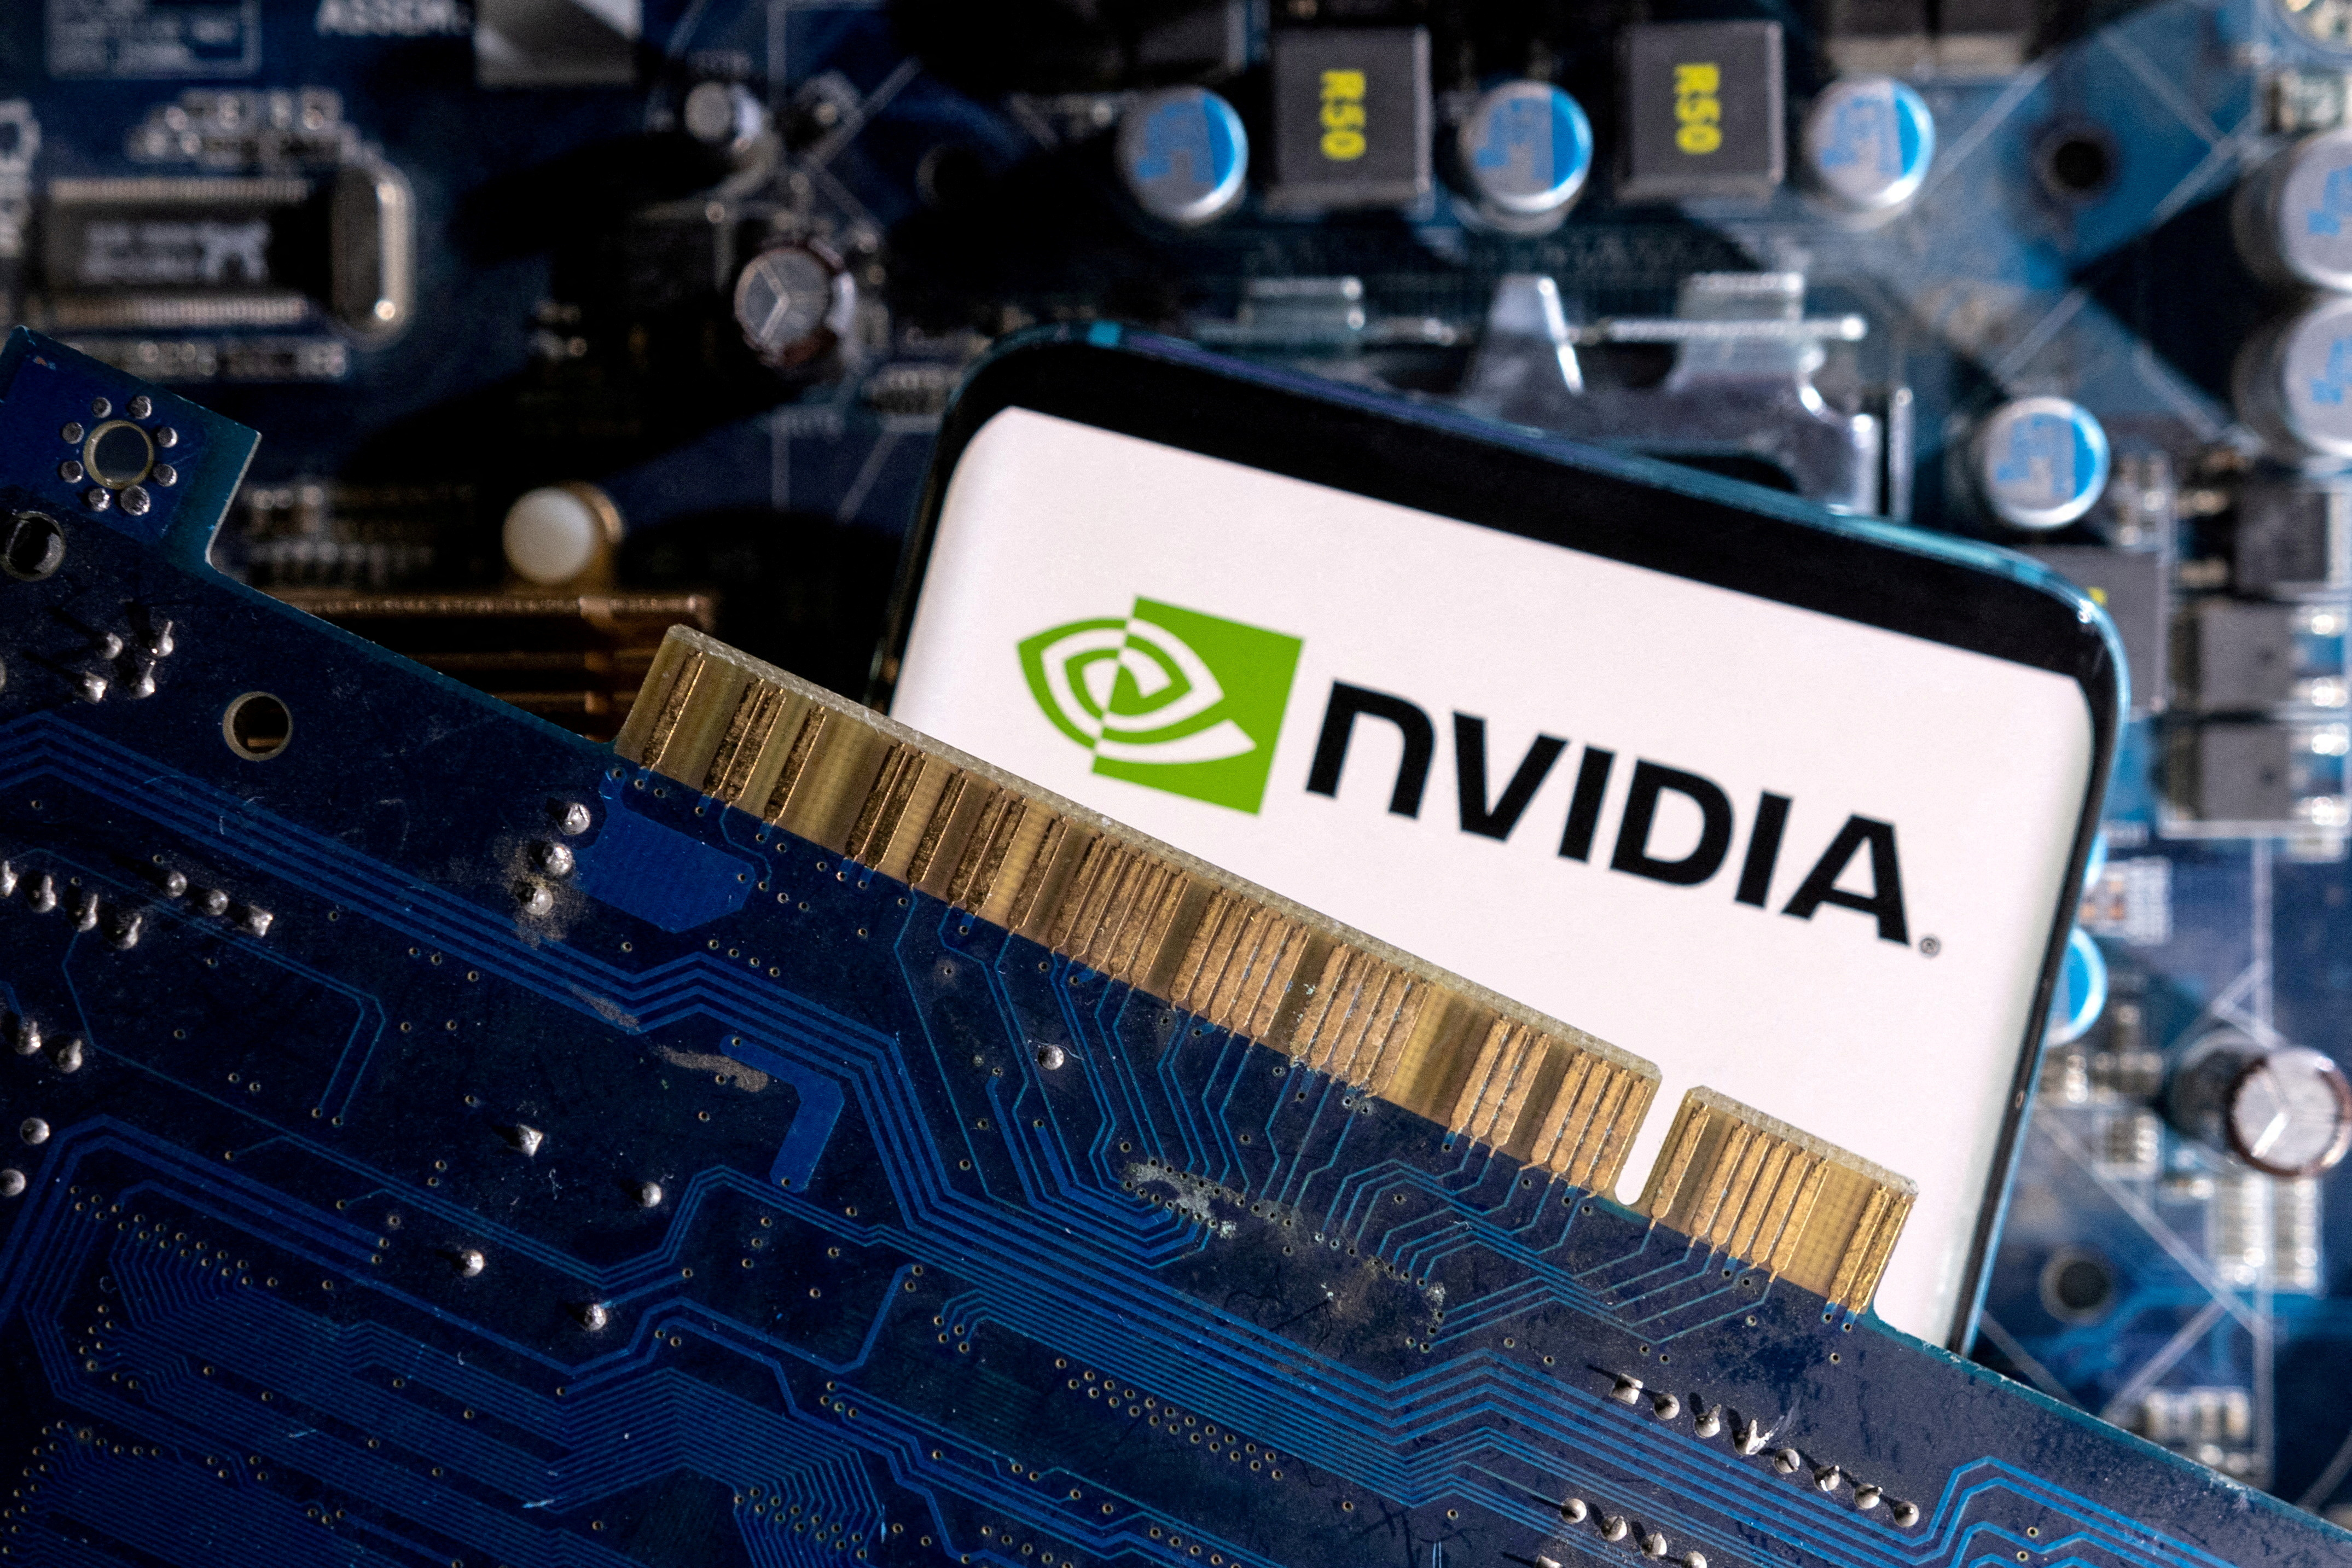 U.S. in game of "catch me if you can" with Nvidia on rules - China media